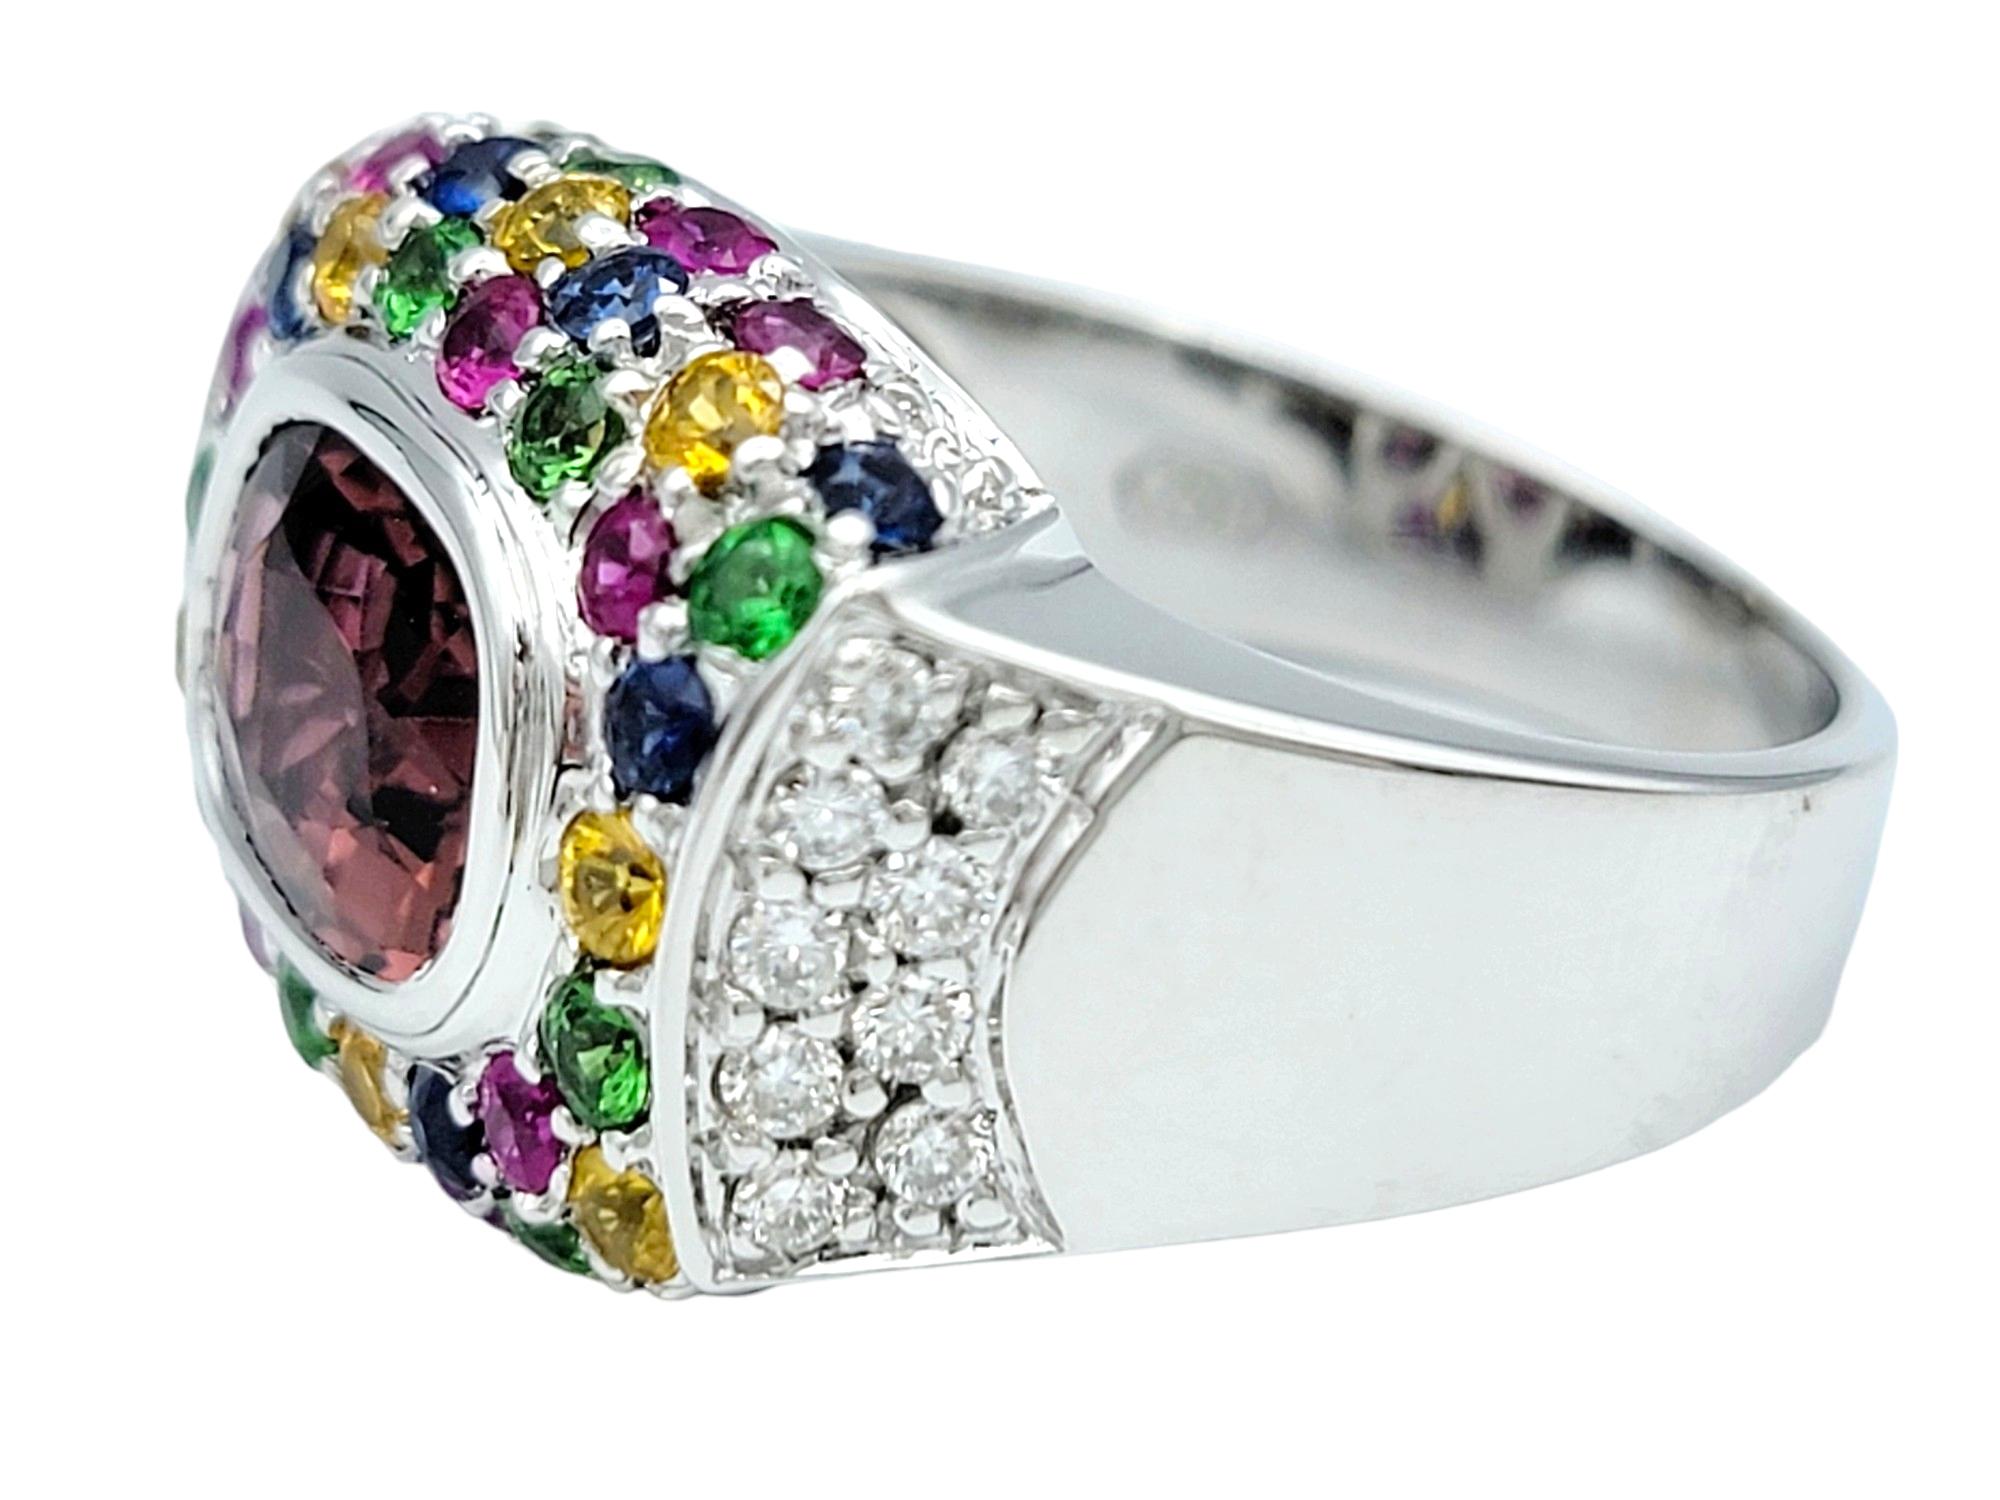 Sonia B. Multi-Colored Gemstone Squared Cocktail Ring Set in 18 Karat White Gold In Good Condition For Sale In Scottsdale, AZ